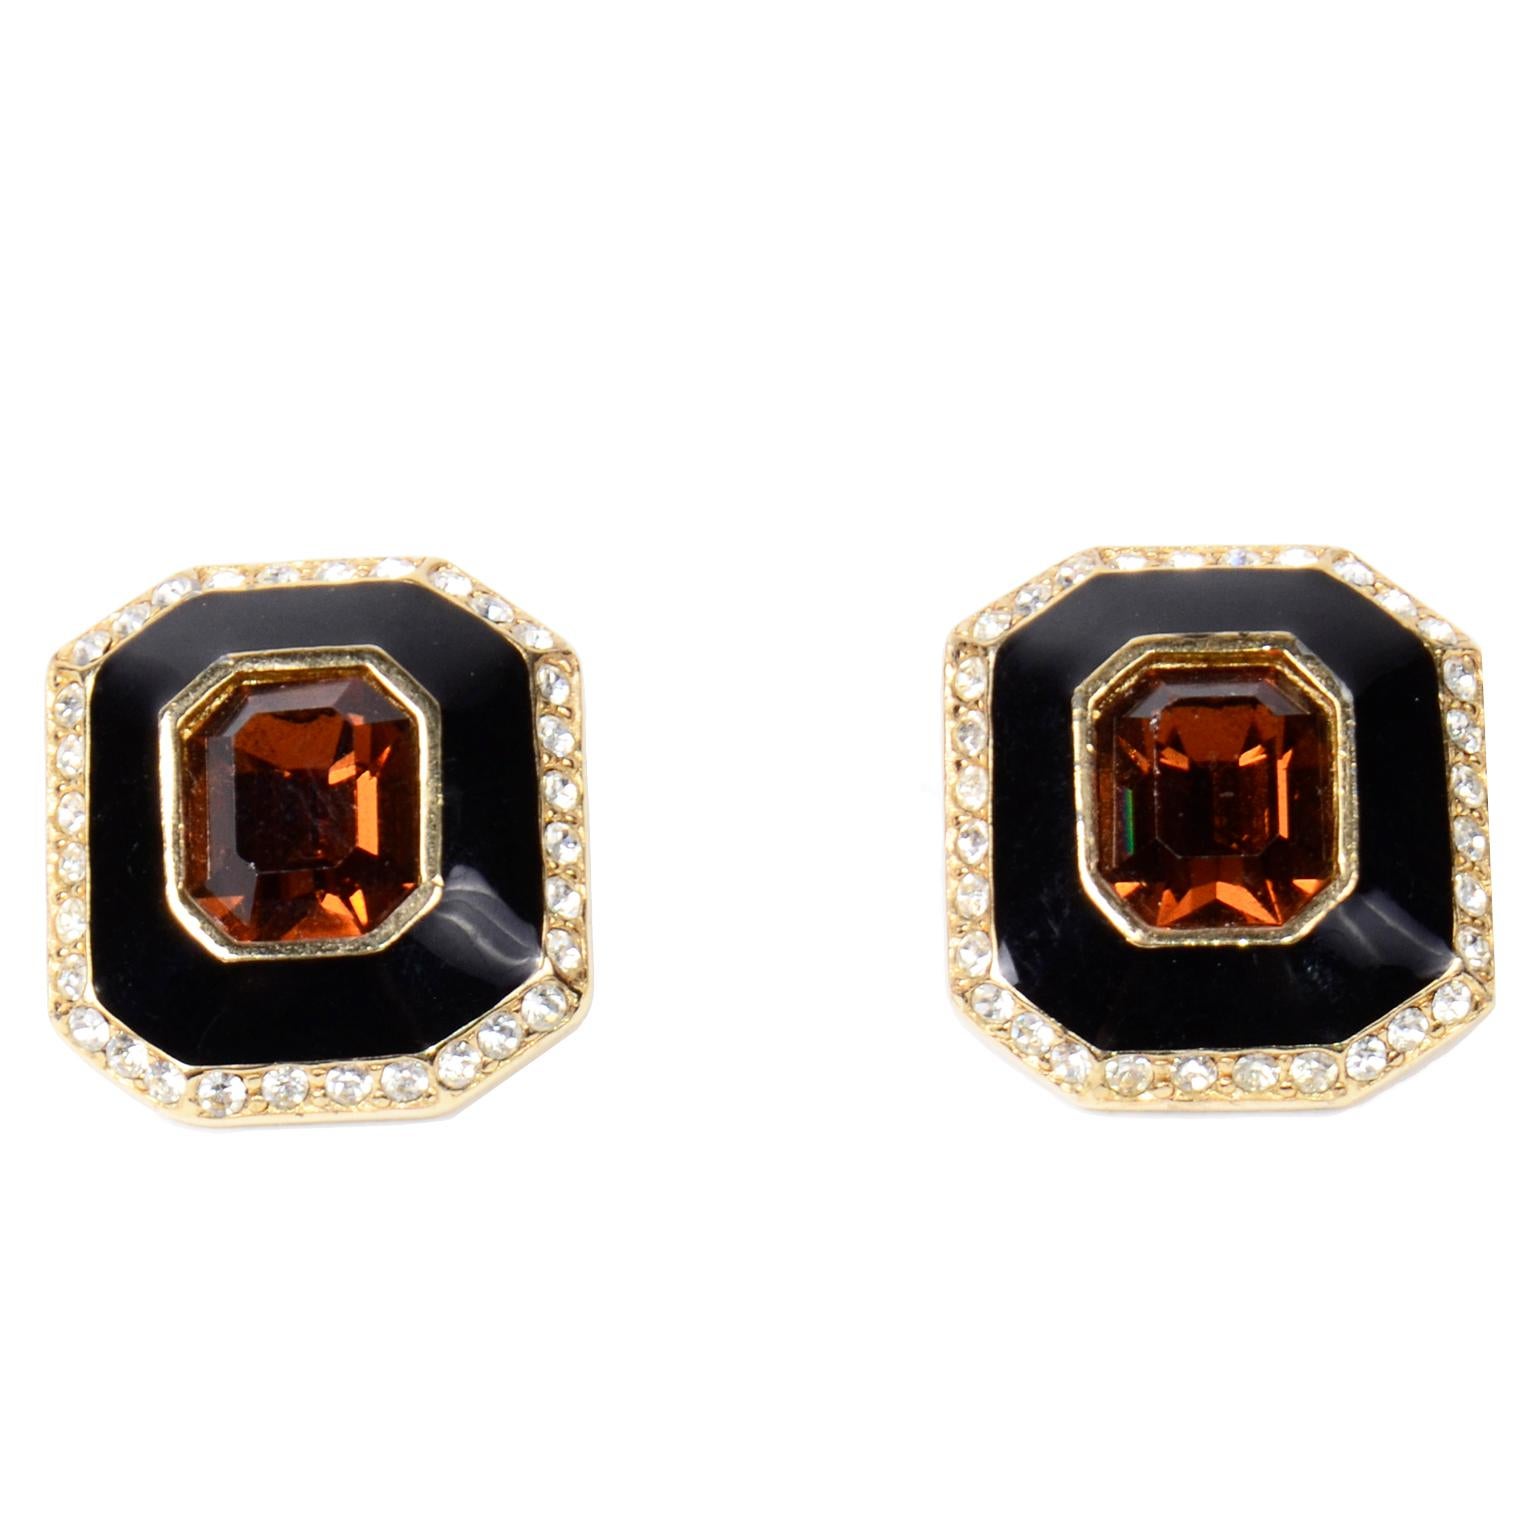 Vintage Ciner Faux Topaz Black and Rhinestone Square Earrings In Excellent Condition For Sale In Portland, OR